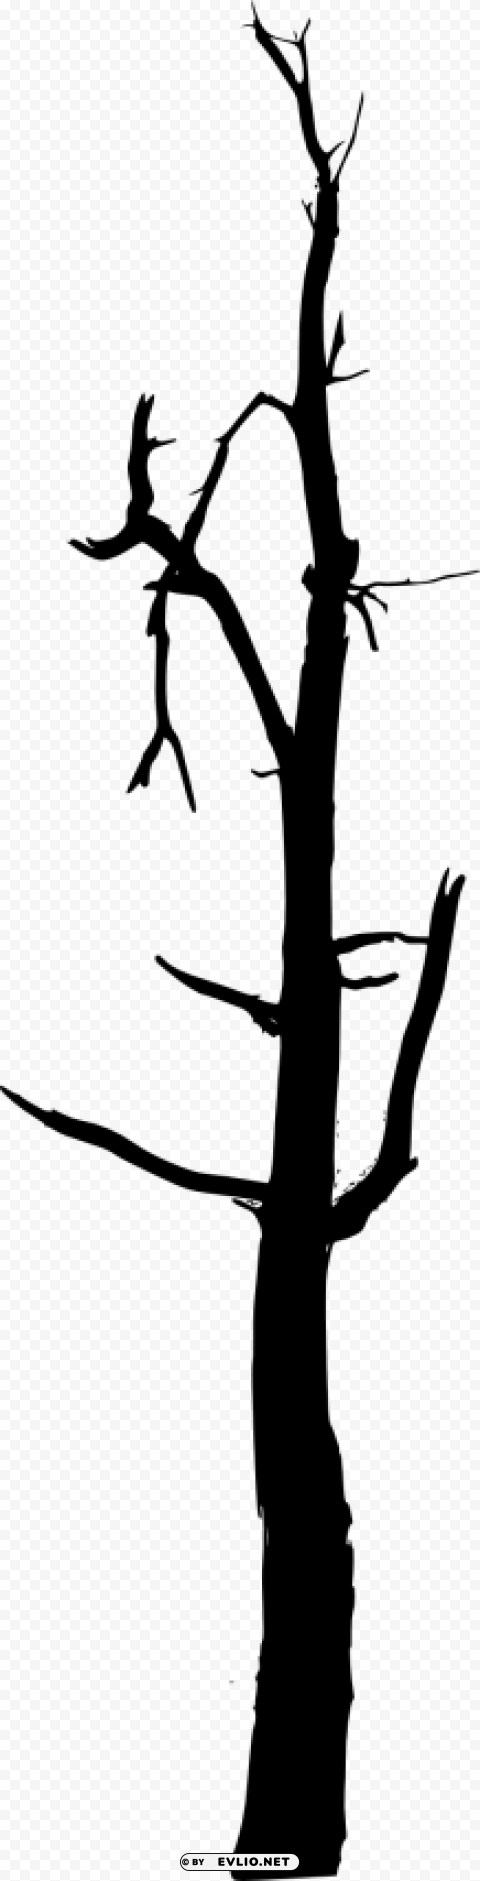 simple bare tree silhouette Isolated Artwork on HighQuality Transparent PNG